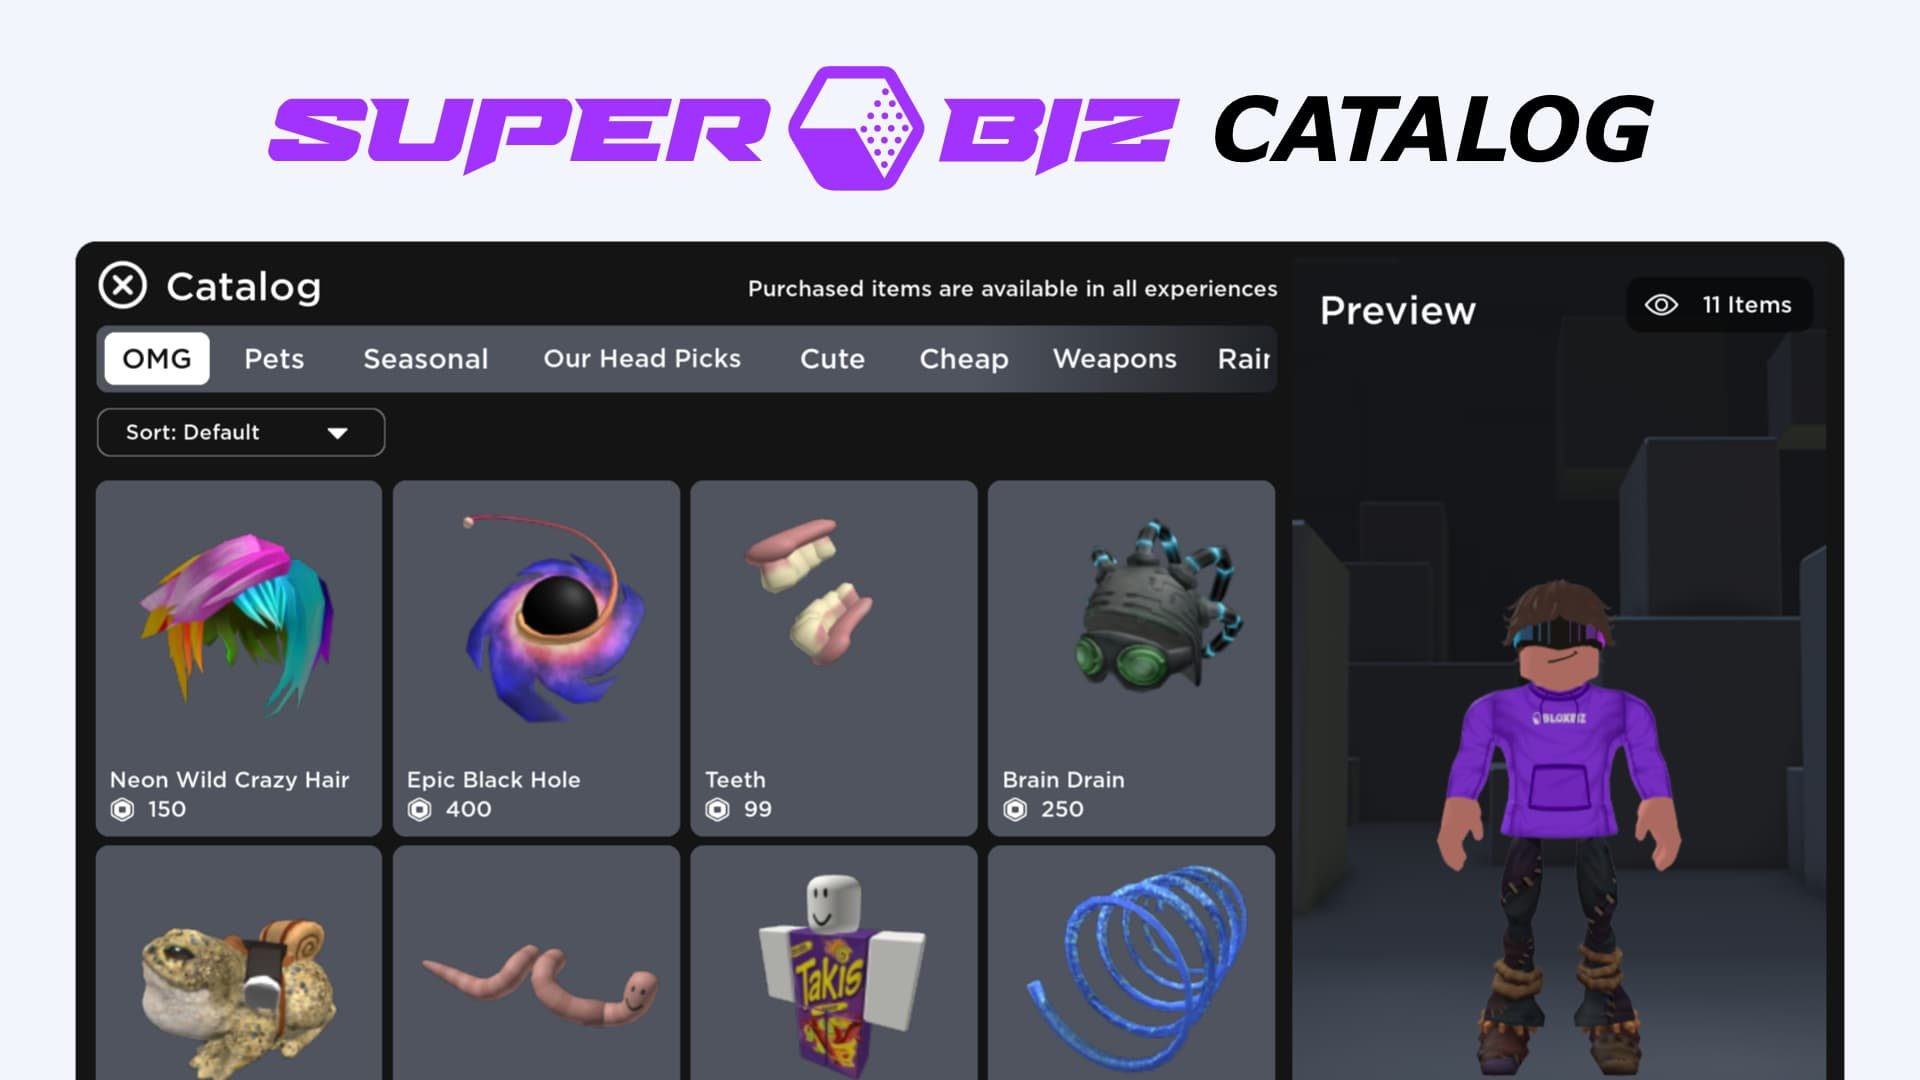 Super Biz on X: We've been working on something new 🛍 Super Biz Catalog  – a new monetization tool that makes it easy to earn more money from  selling avatar items in